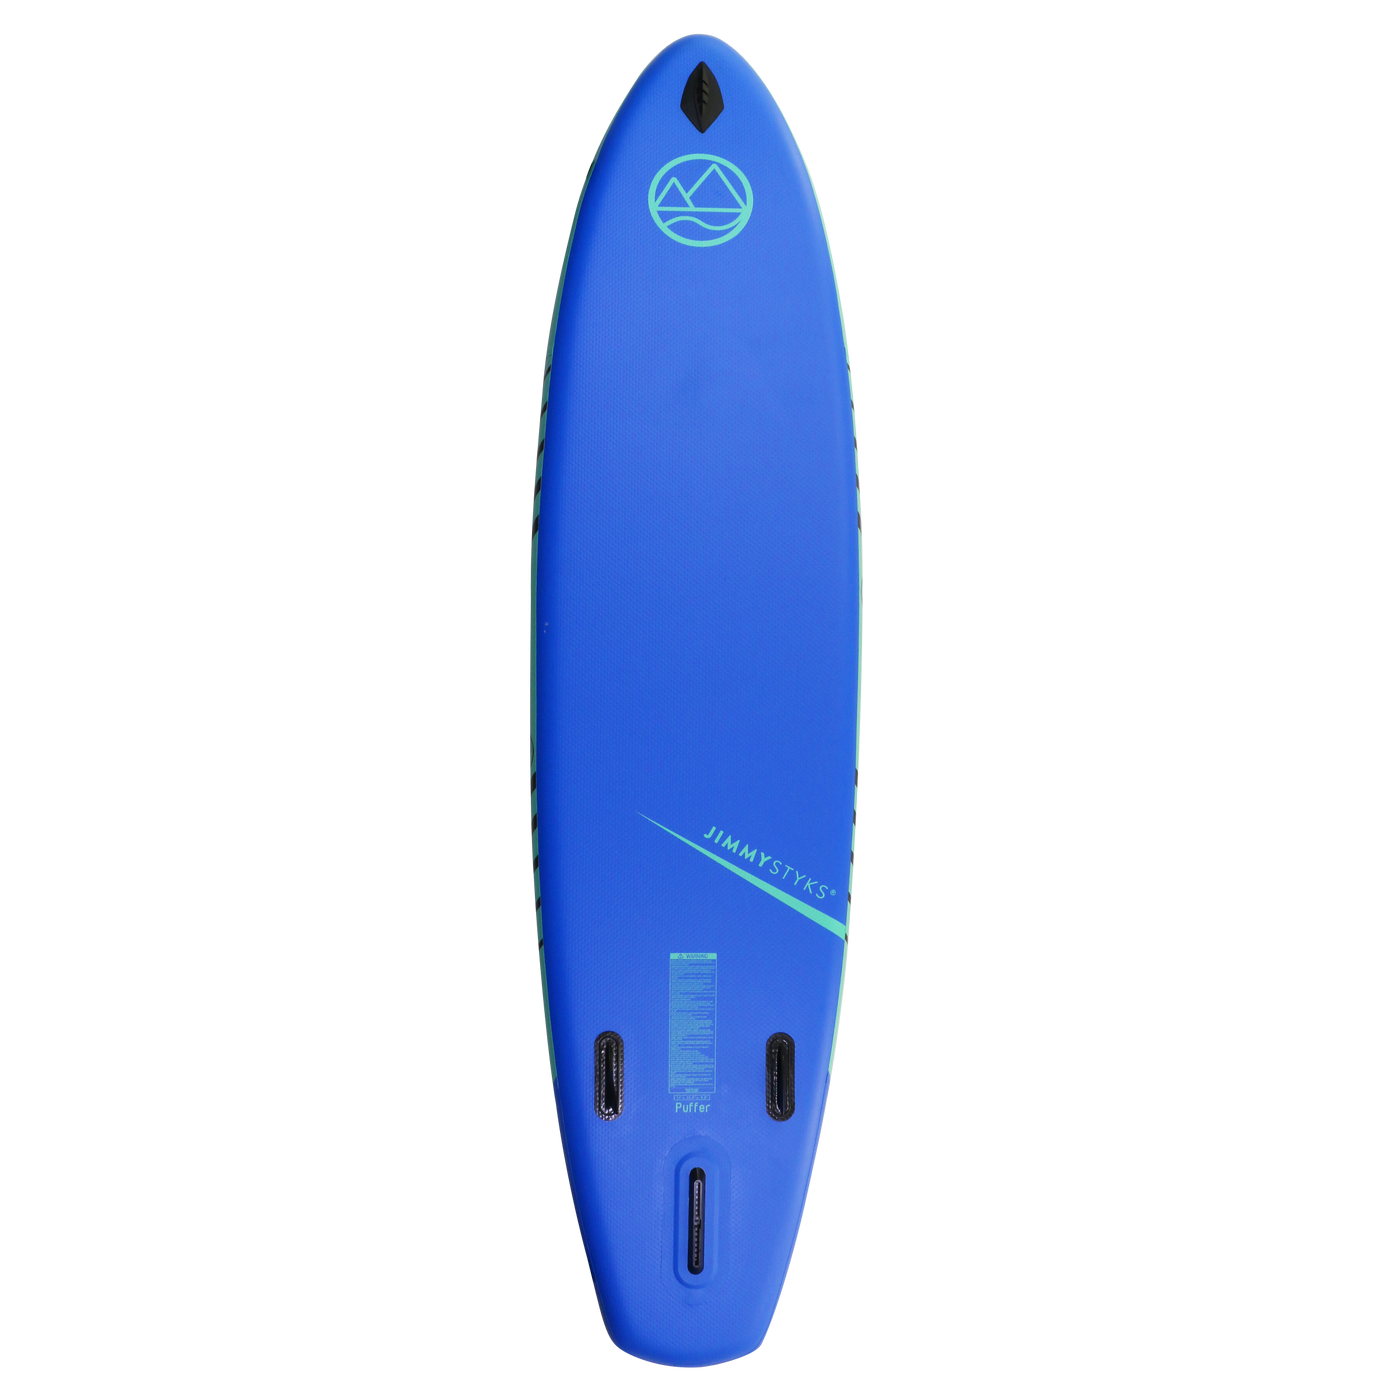 Jimmy Styks Puffer 11' Inflatable Stand up Paddle Board